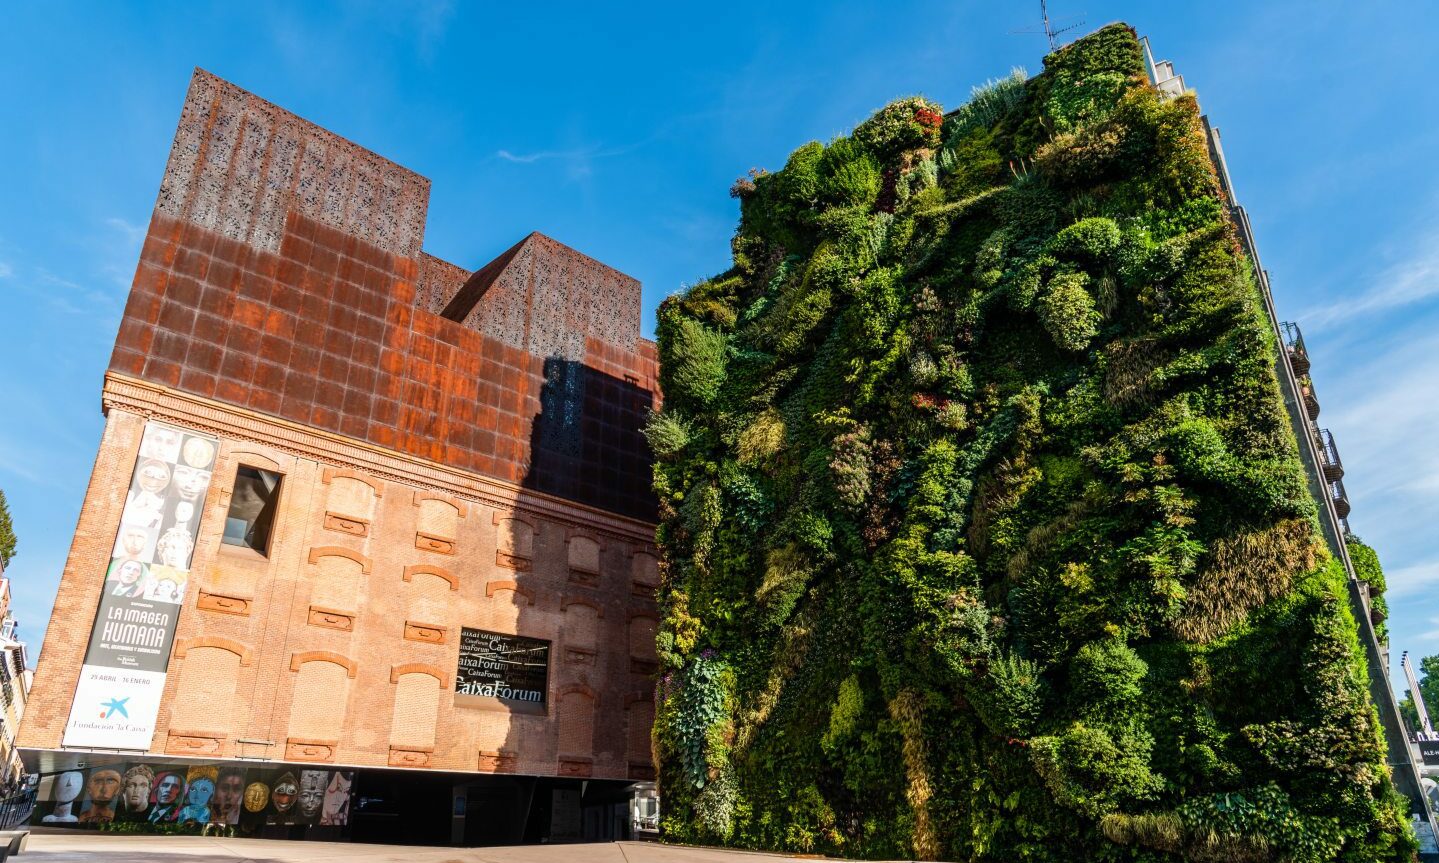 The Caixa Forum museum in Madrid, Spain, with a green "living wall".